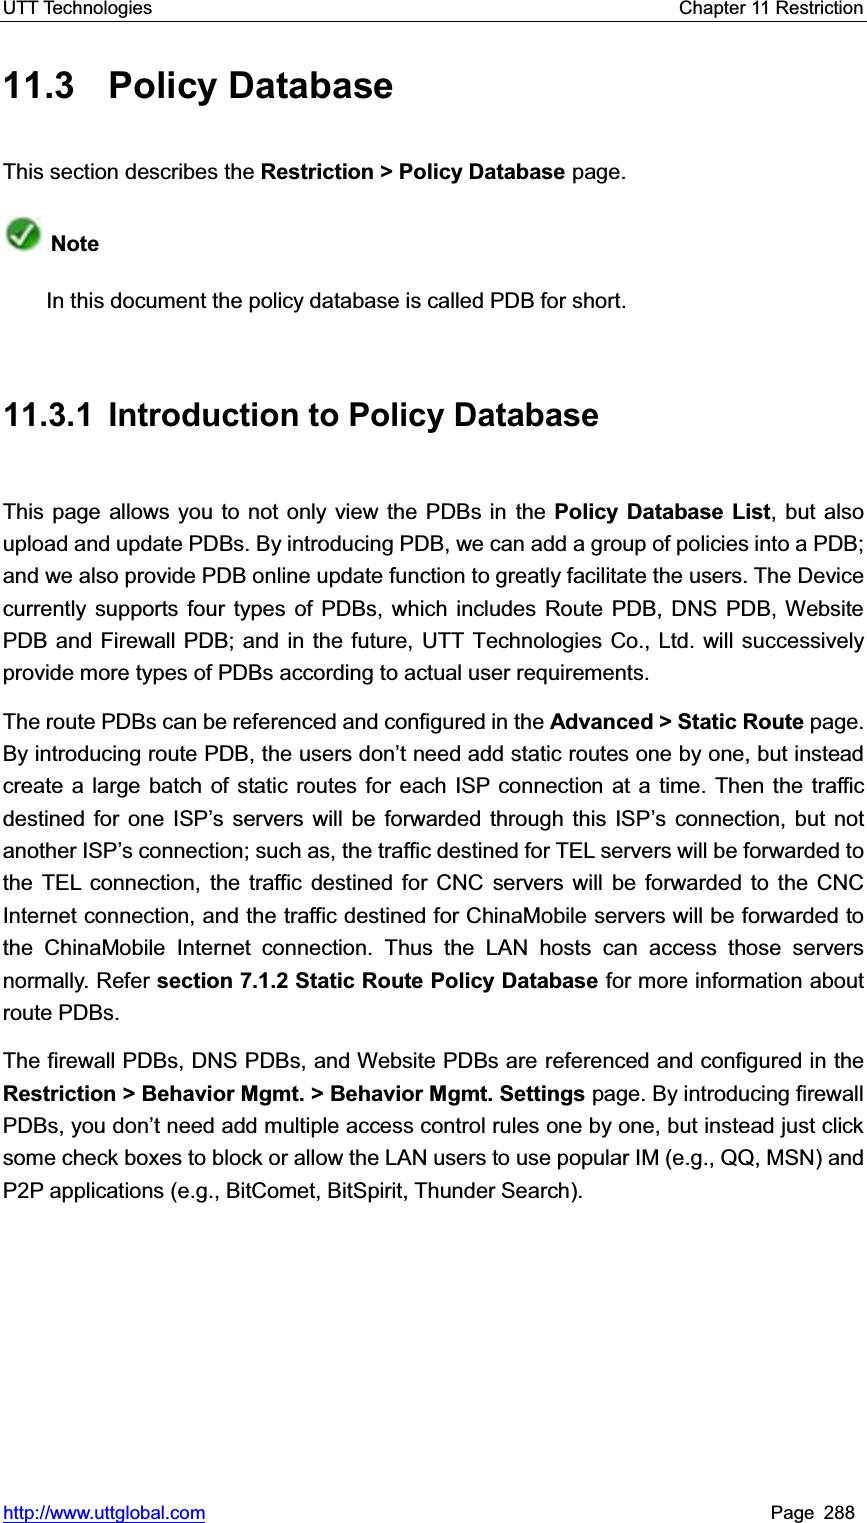 UTT Technologies    Chapter 11 Restriction   http://www.uttglobal.com Page 288 11.3 Policy Database This section describes the Restriction &gt; Policy Database page. NoteIn this document the policy database is called PDB for short. 11.3.1  Introduction to Policy Database This page allows you to not only view the PDBs in the Policy Database List, but also upload and update PDBs. By introducing PDB, we can add a group of policies into a PDB; and we also provide PDB online update function to greatly facilitate the users. The Device currently supports four types of PDBs, which includes Route PDB, DNS PDB, Website PDB and Firewall PDB; and in the future, UTT Technologies Co., Ltd. will successively provide more types of PDBs according to actual user requirements. The route PDBs can be referenced and configured in the Advanced &gt; Static Route page. By introducing route PDB, the XVHUVGRQ¶t need add static routes one by one, but insteadcreate a large batch of static routes for each ISP connection at a time. Then the traffic destined for one ISP¶s servers will be forwarded through this ISP¶s connection, but not another ISP¶s connection; such as, the traffic destined for TEL servers will be forwarded to the TEL connection, the traffic destined for CNC servers will be forwarded to the CNC Internet connection, and the traffic destined for ChinaMobile servers will be forwarded to the ChinaMobile Internet connection. Thus the LAN hosts can access those servers normally. Refer section 7.1.2 Static Route Policy Database for more information about route PDBs.   The firewall PDBs, DNS PDBs, and Website PDBs are referenced and configured in theRestriction &gt; Behavior Mgmt. &gt; Behavior Mgmt. Settings page. By introducing firewall PDBs, you GRQ¶W need add multiple access control rules one by one, but instead just click some check boxes to block or allow the LAN users to use popular IM (e.g., QQ, MSN) and P2P applications (e.g., BitComet, BitSpirit, Thunder Search).   